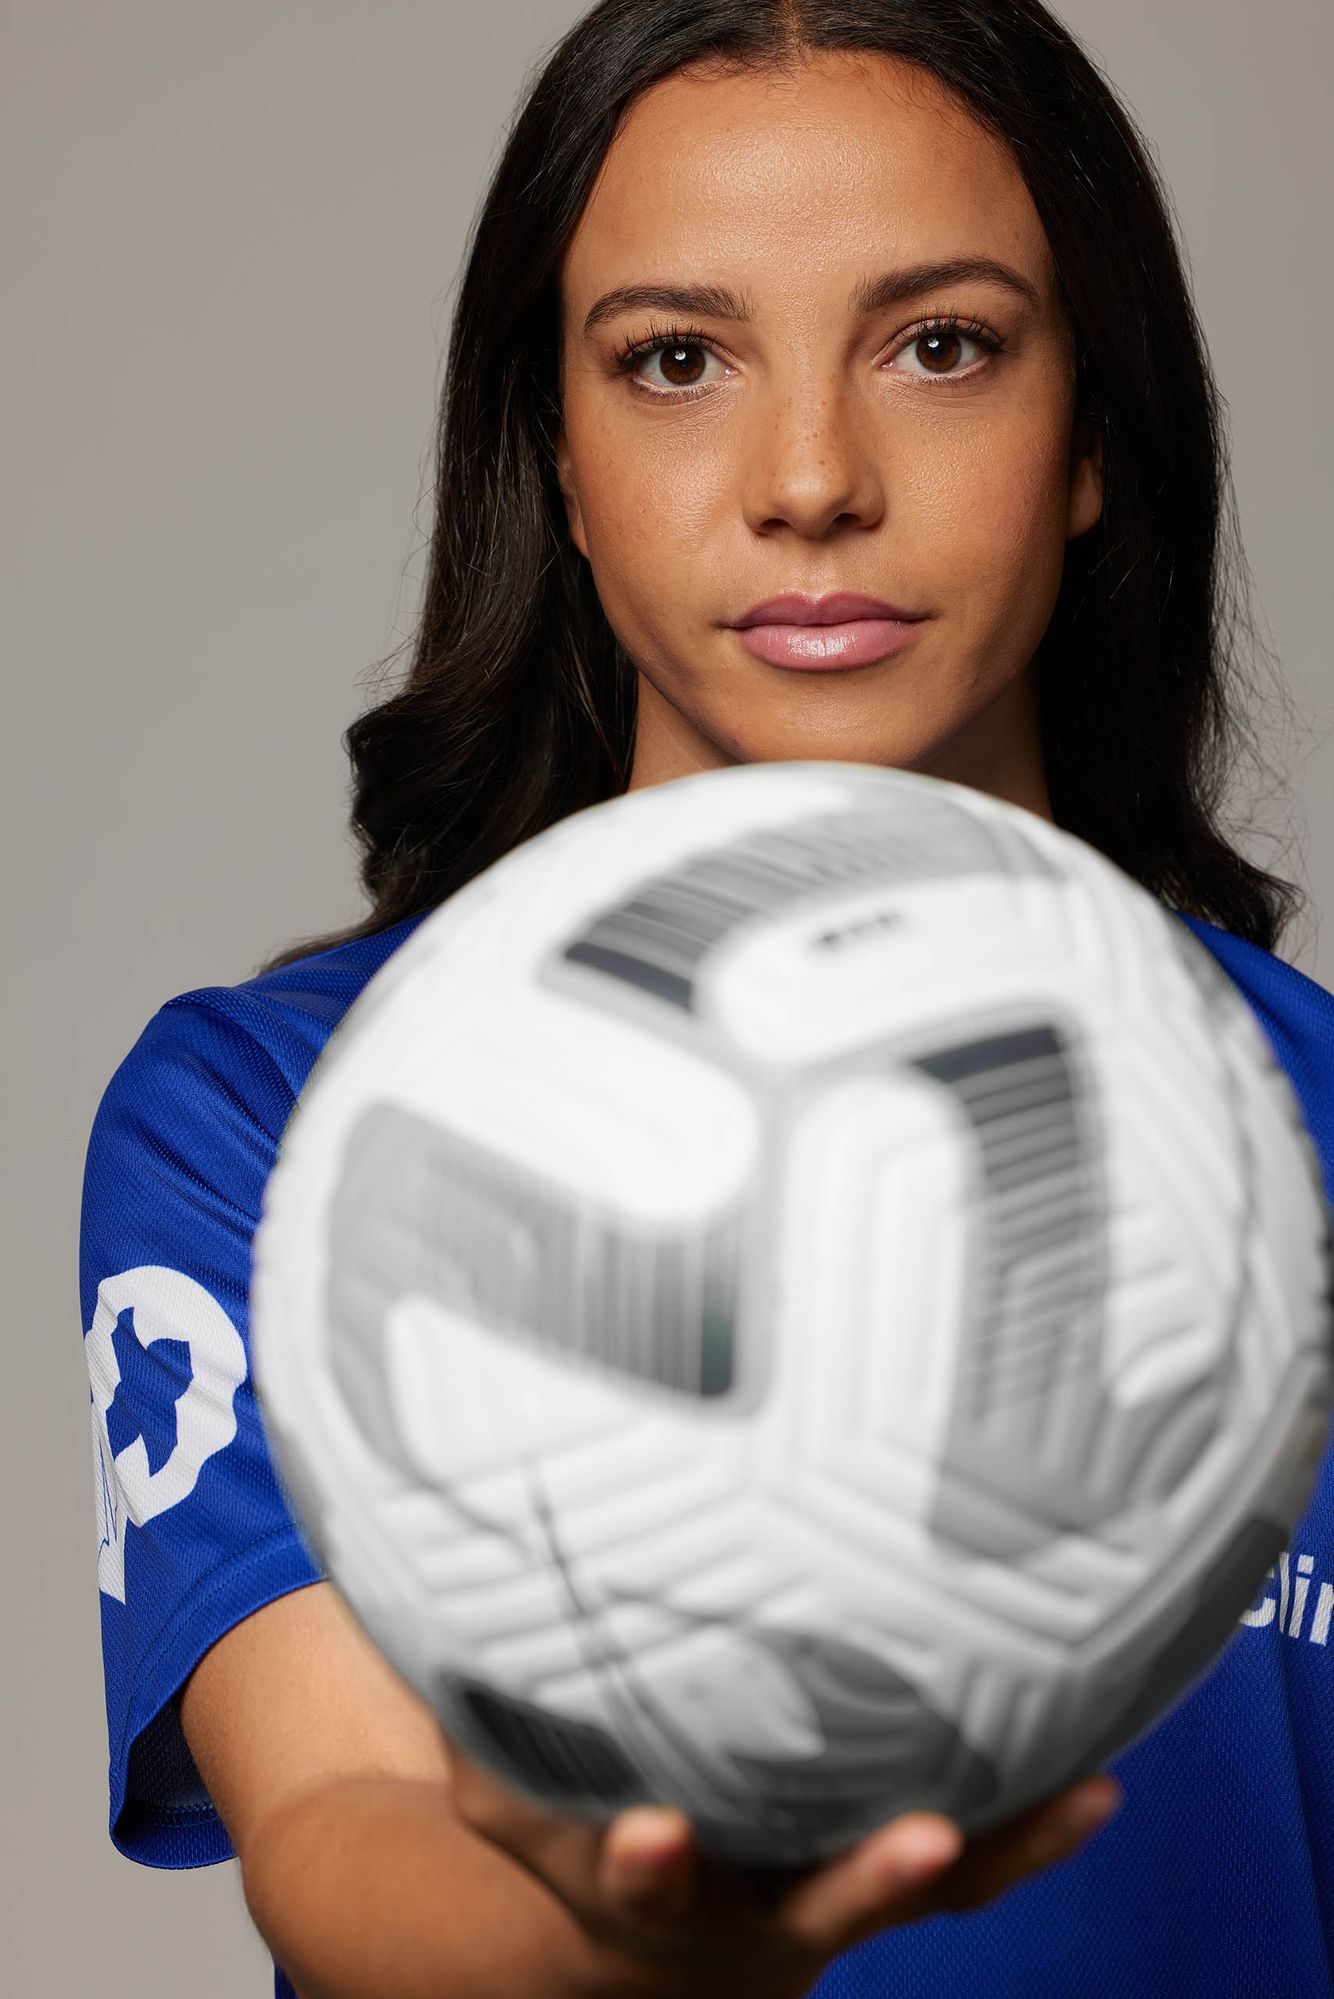 Mallory Pugh Swanson, by Chicago advertising photographer Jeff Schear